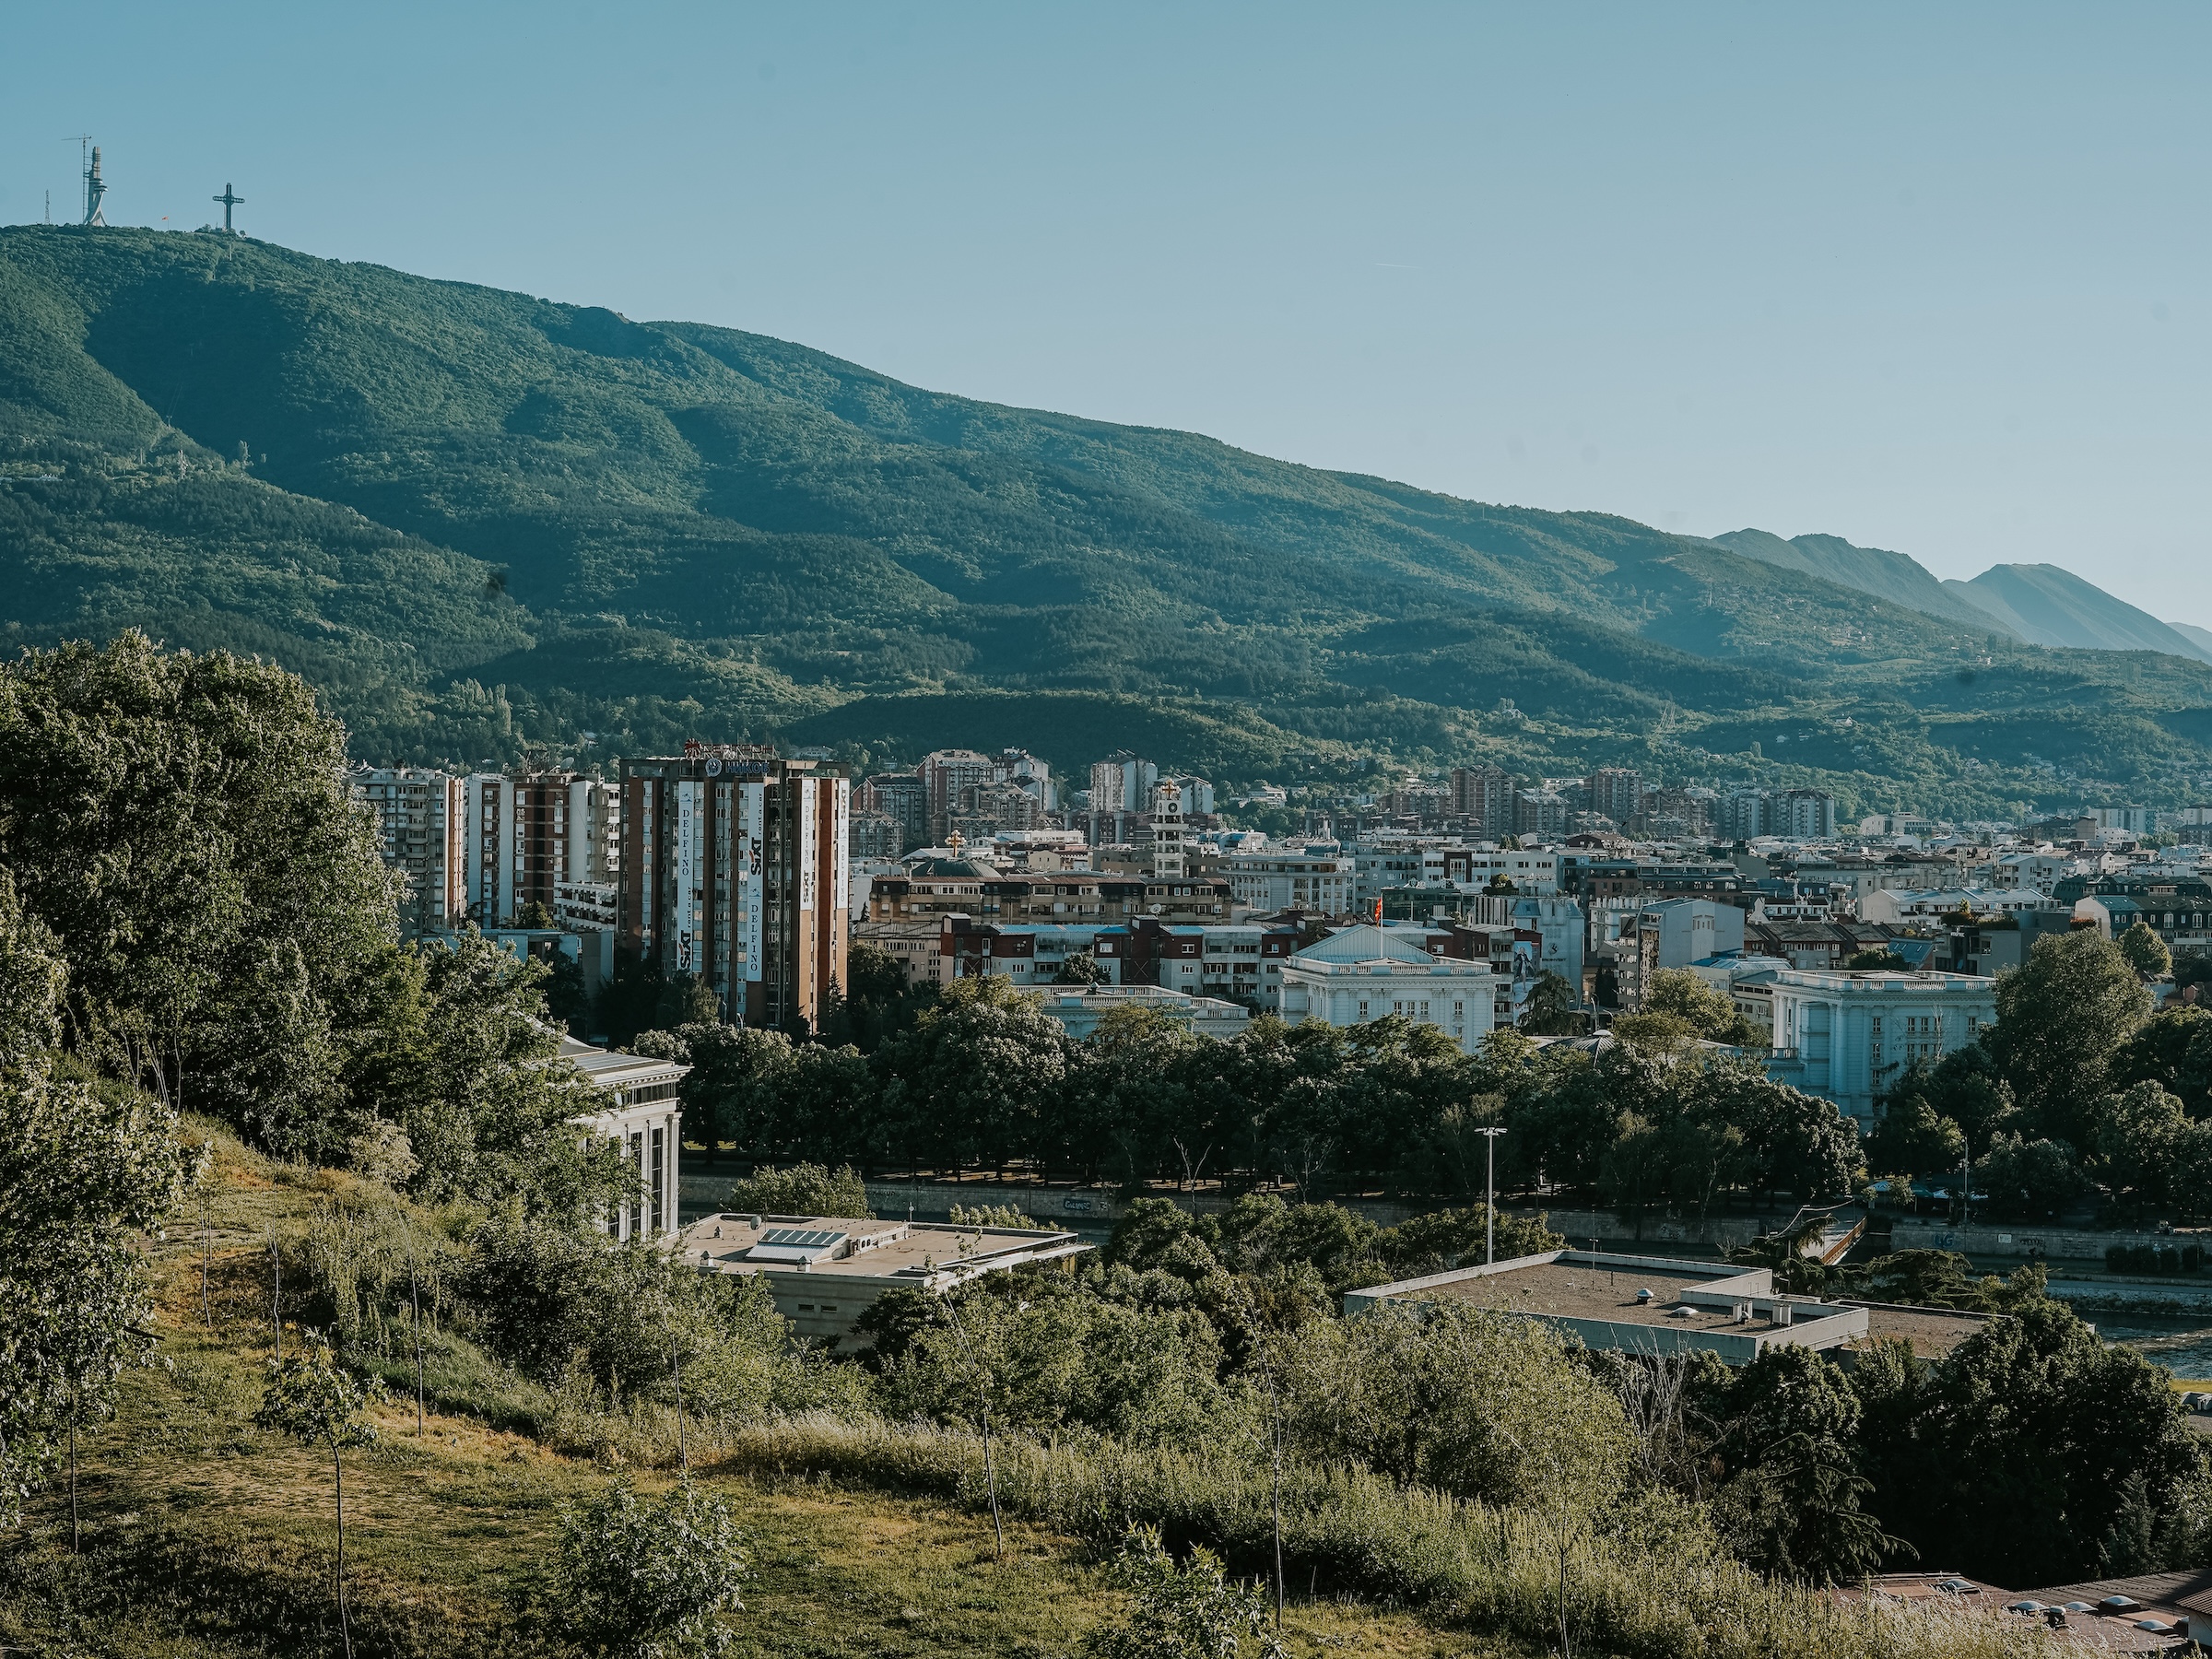 View of Skopje from the mountain top